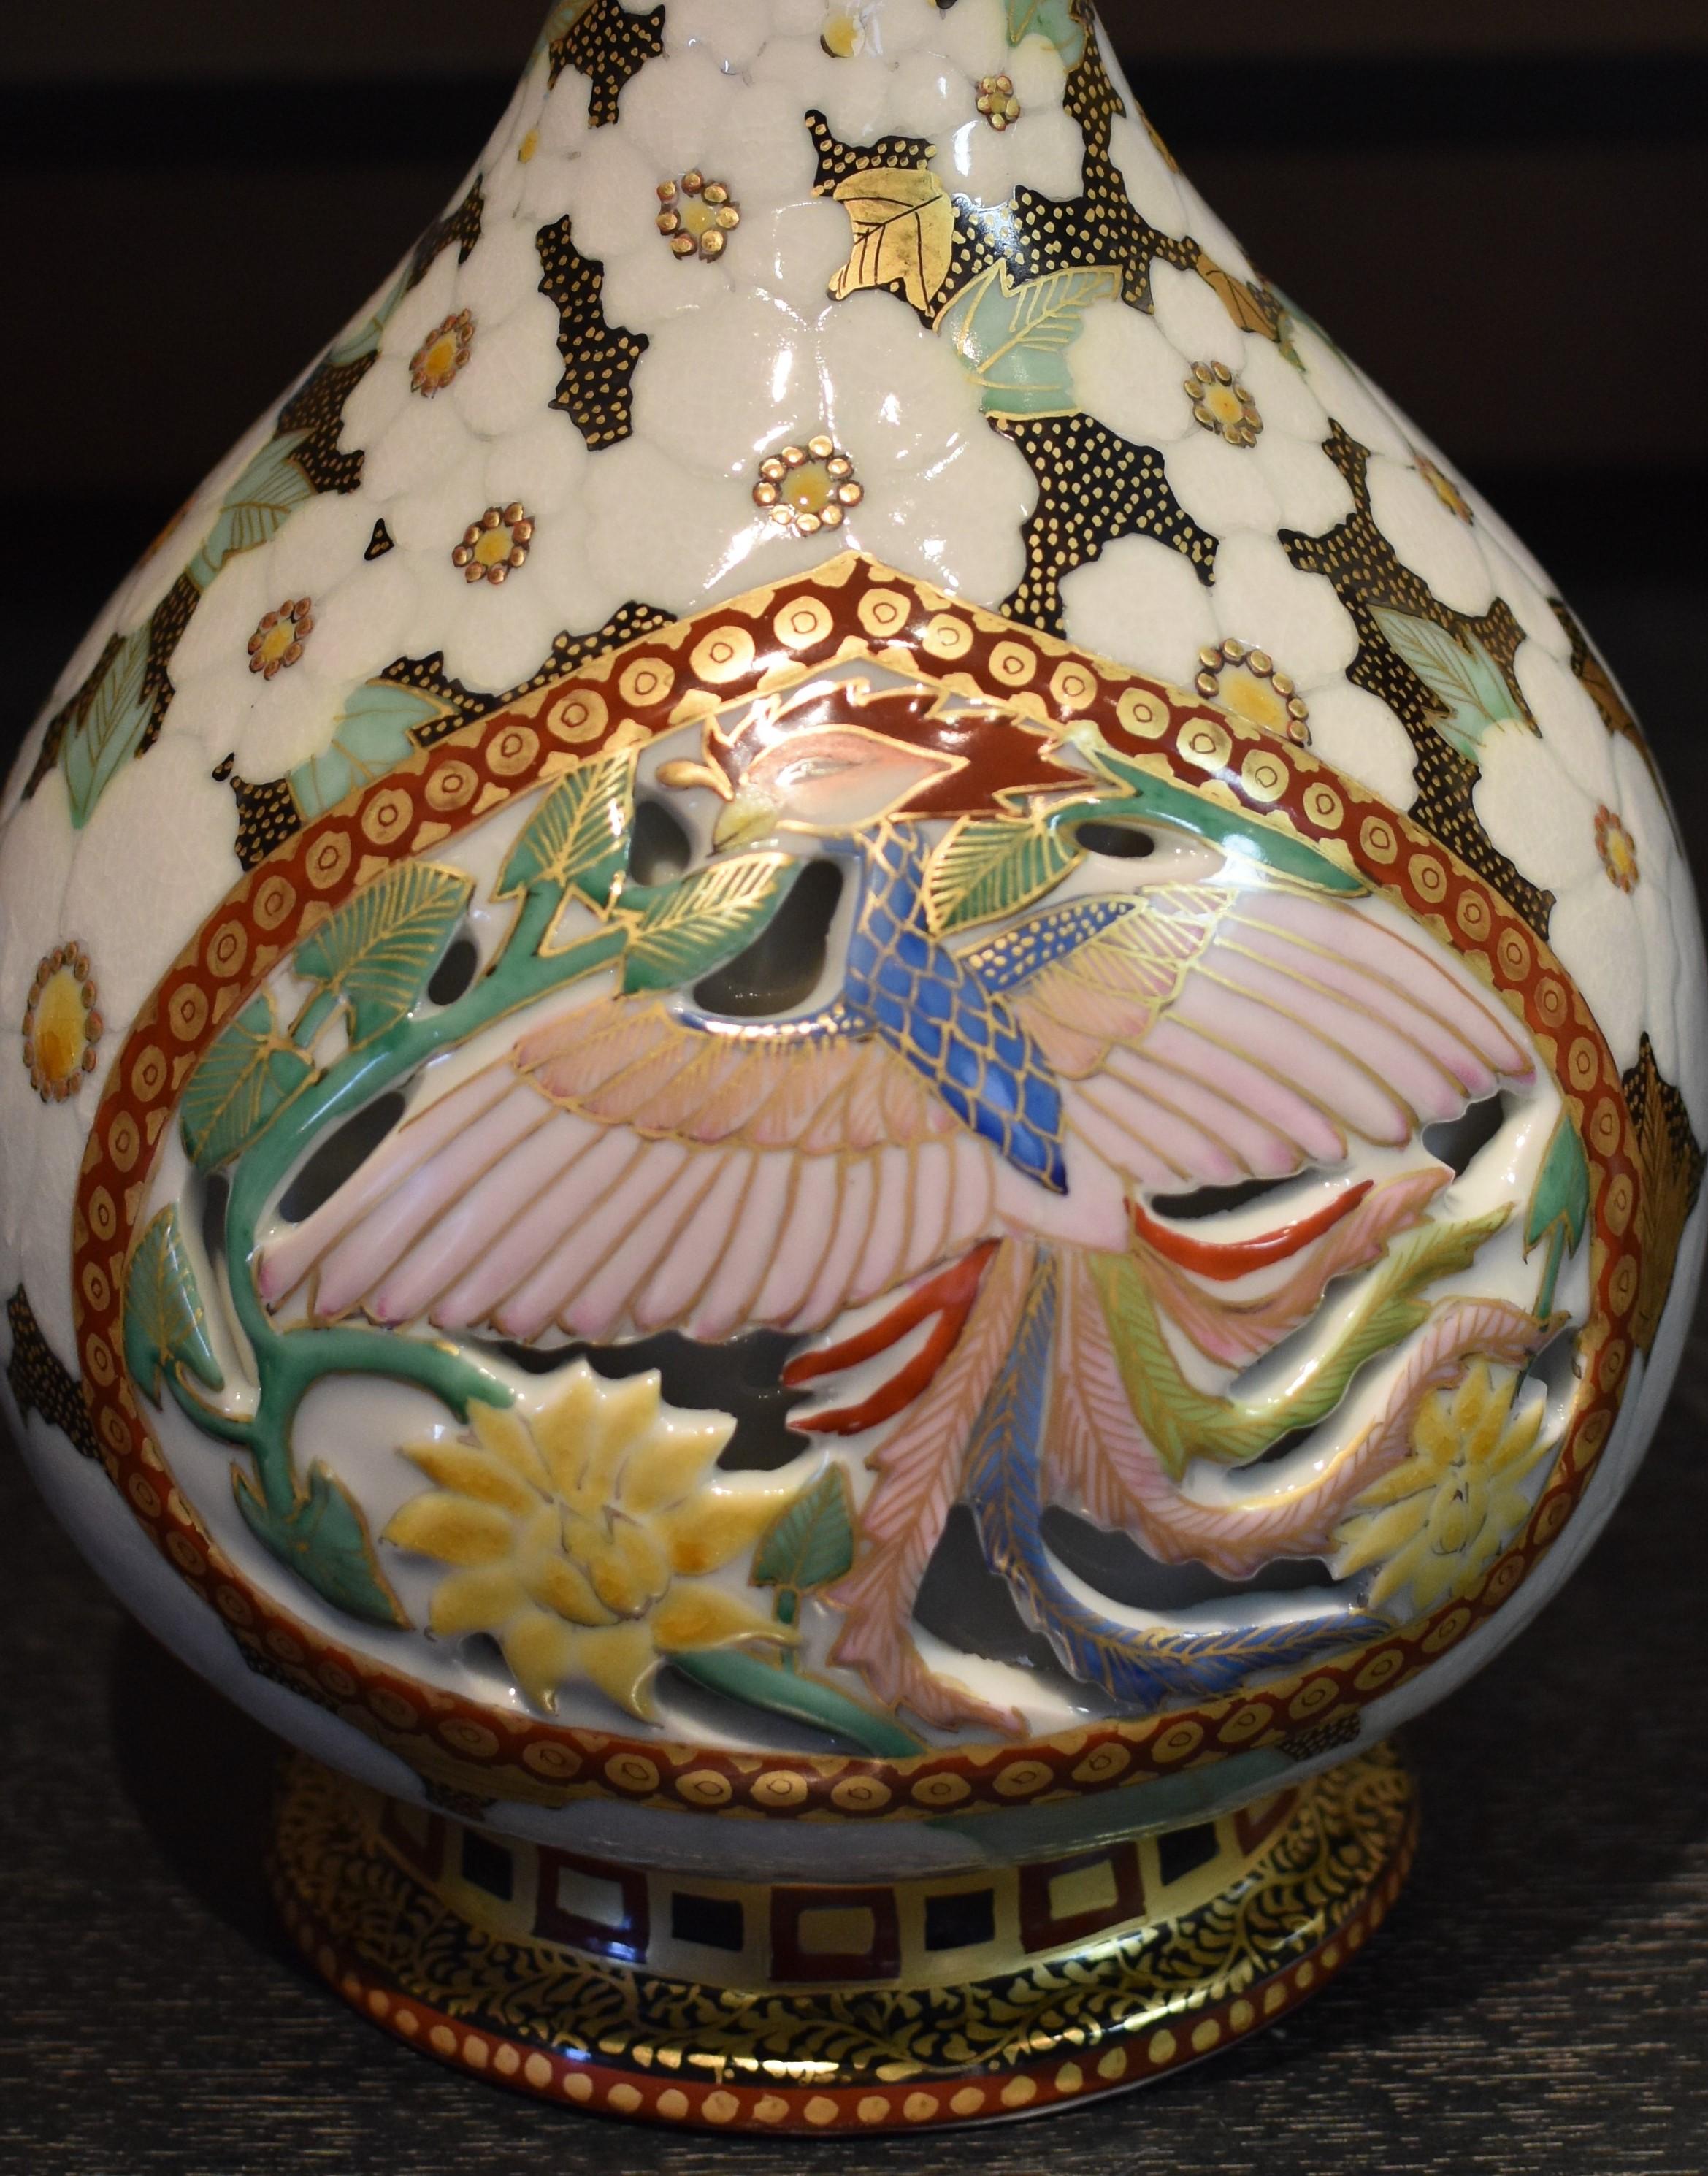 Extraordinary Japanese contemporary golden lion ear porcelain vase, featuring two sculpted panels depicting the creatures of ancient Chinese mythology – the phoenix in full flight and the rising dragon. This is a masterpiece by a third-generation